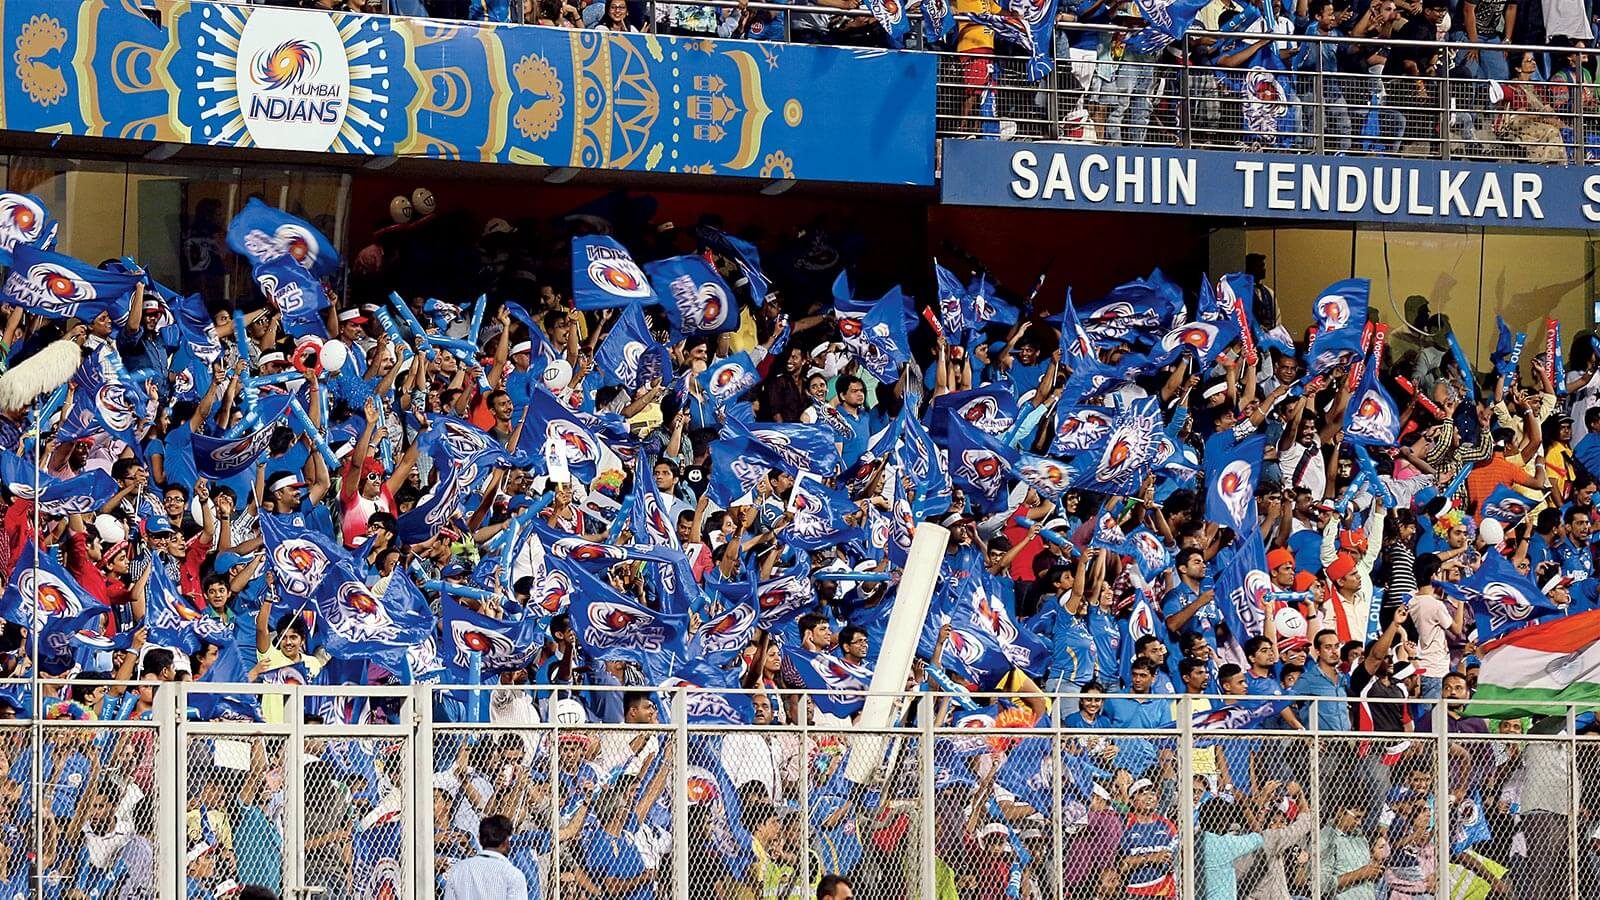 IPL 2022 Mumbai Indians Matches: BCCI rubbishes franchises' request, Rohit Sharma & Co to play 4 matches at Wankhede Stadium